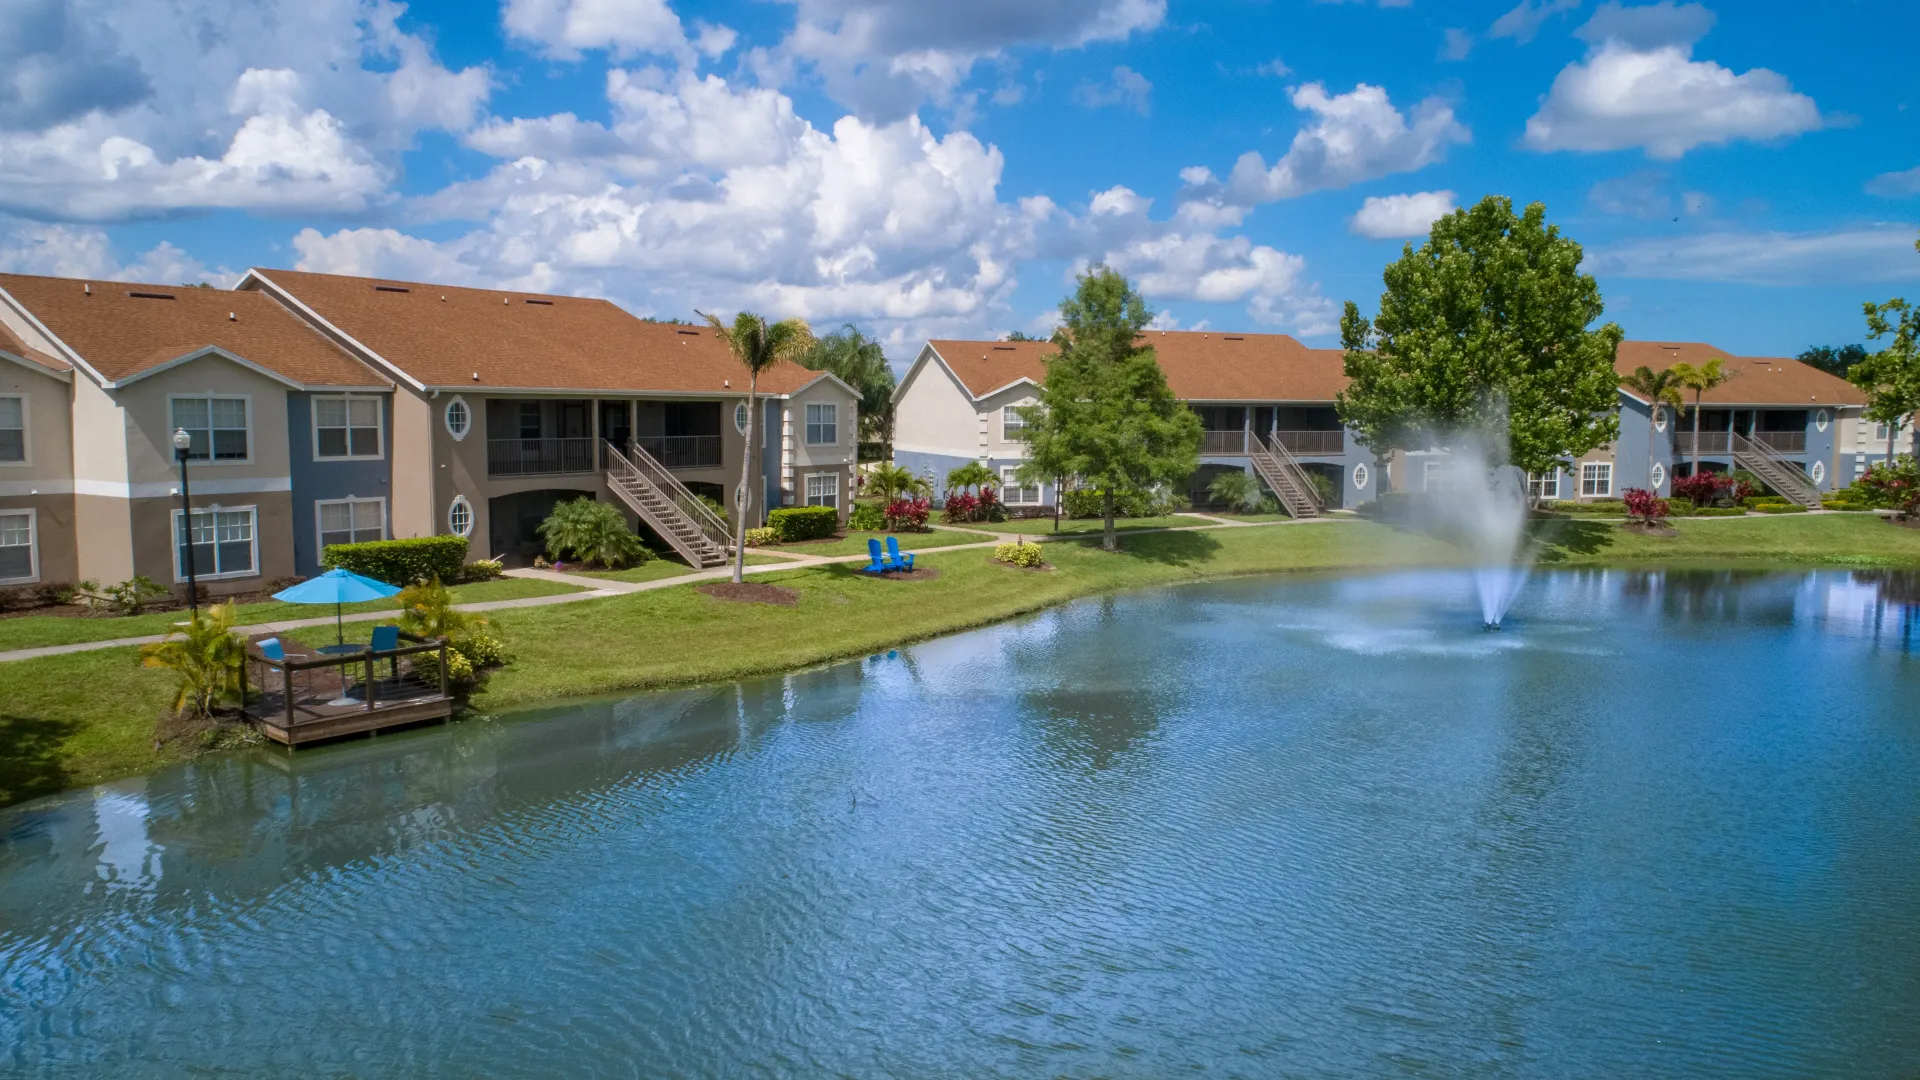 The lakeside view showcasing the community's serene surroundings, with inviting seating areas for residents to enjoy picturesque lake views year-round. 